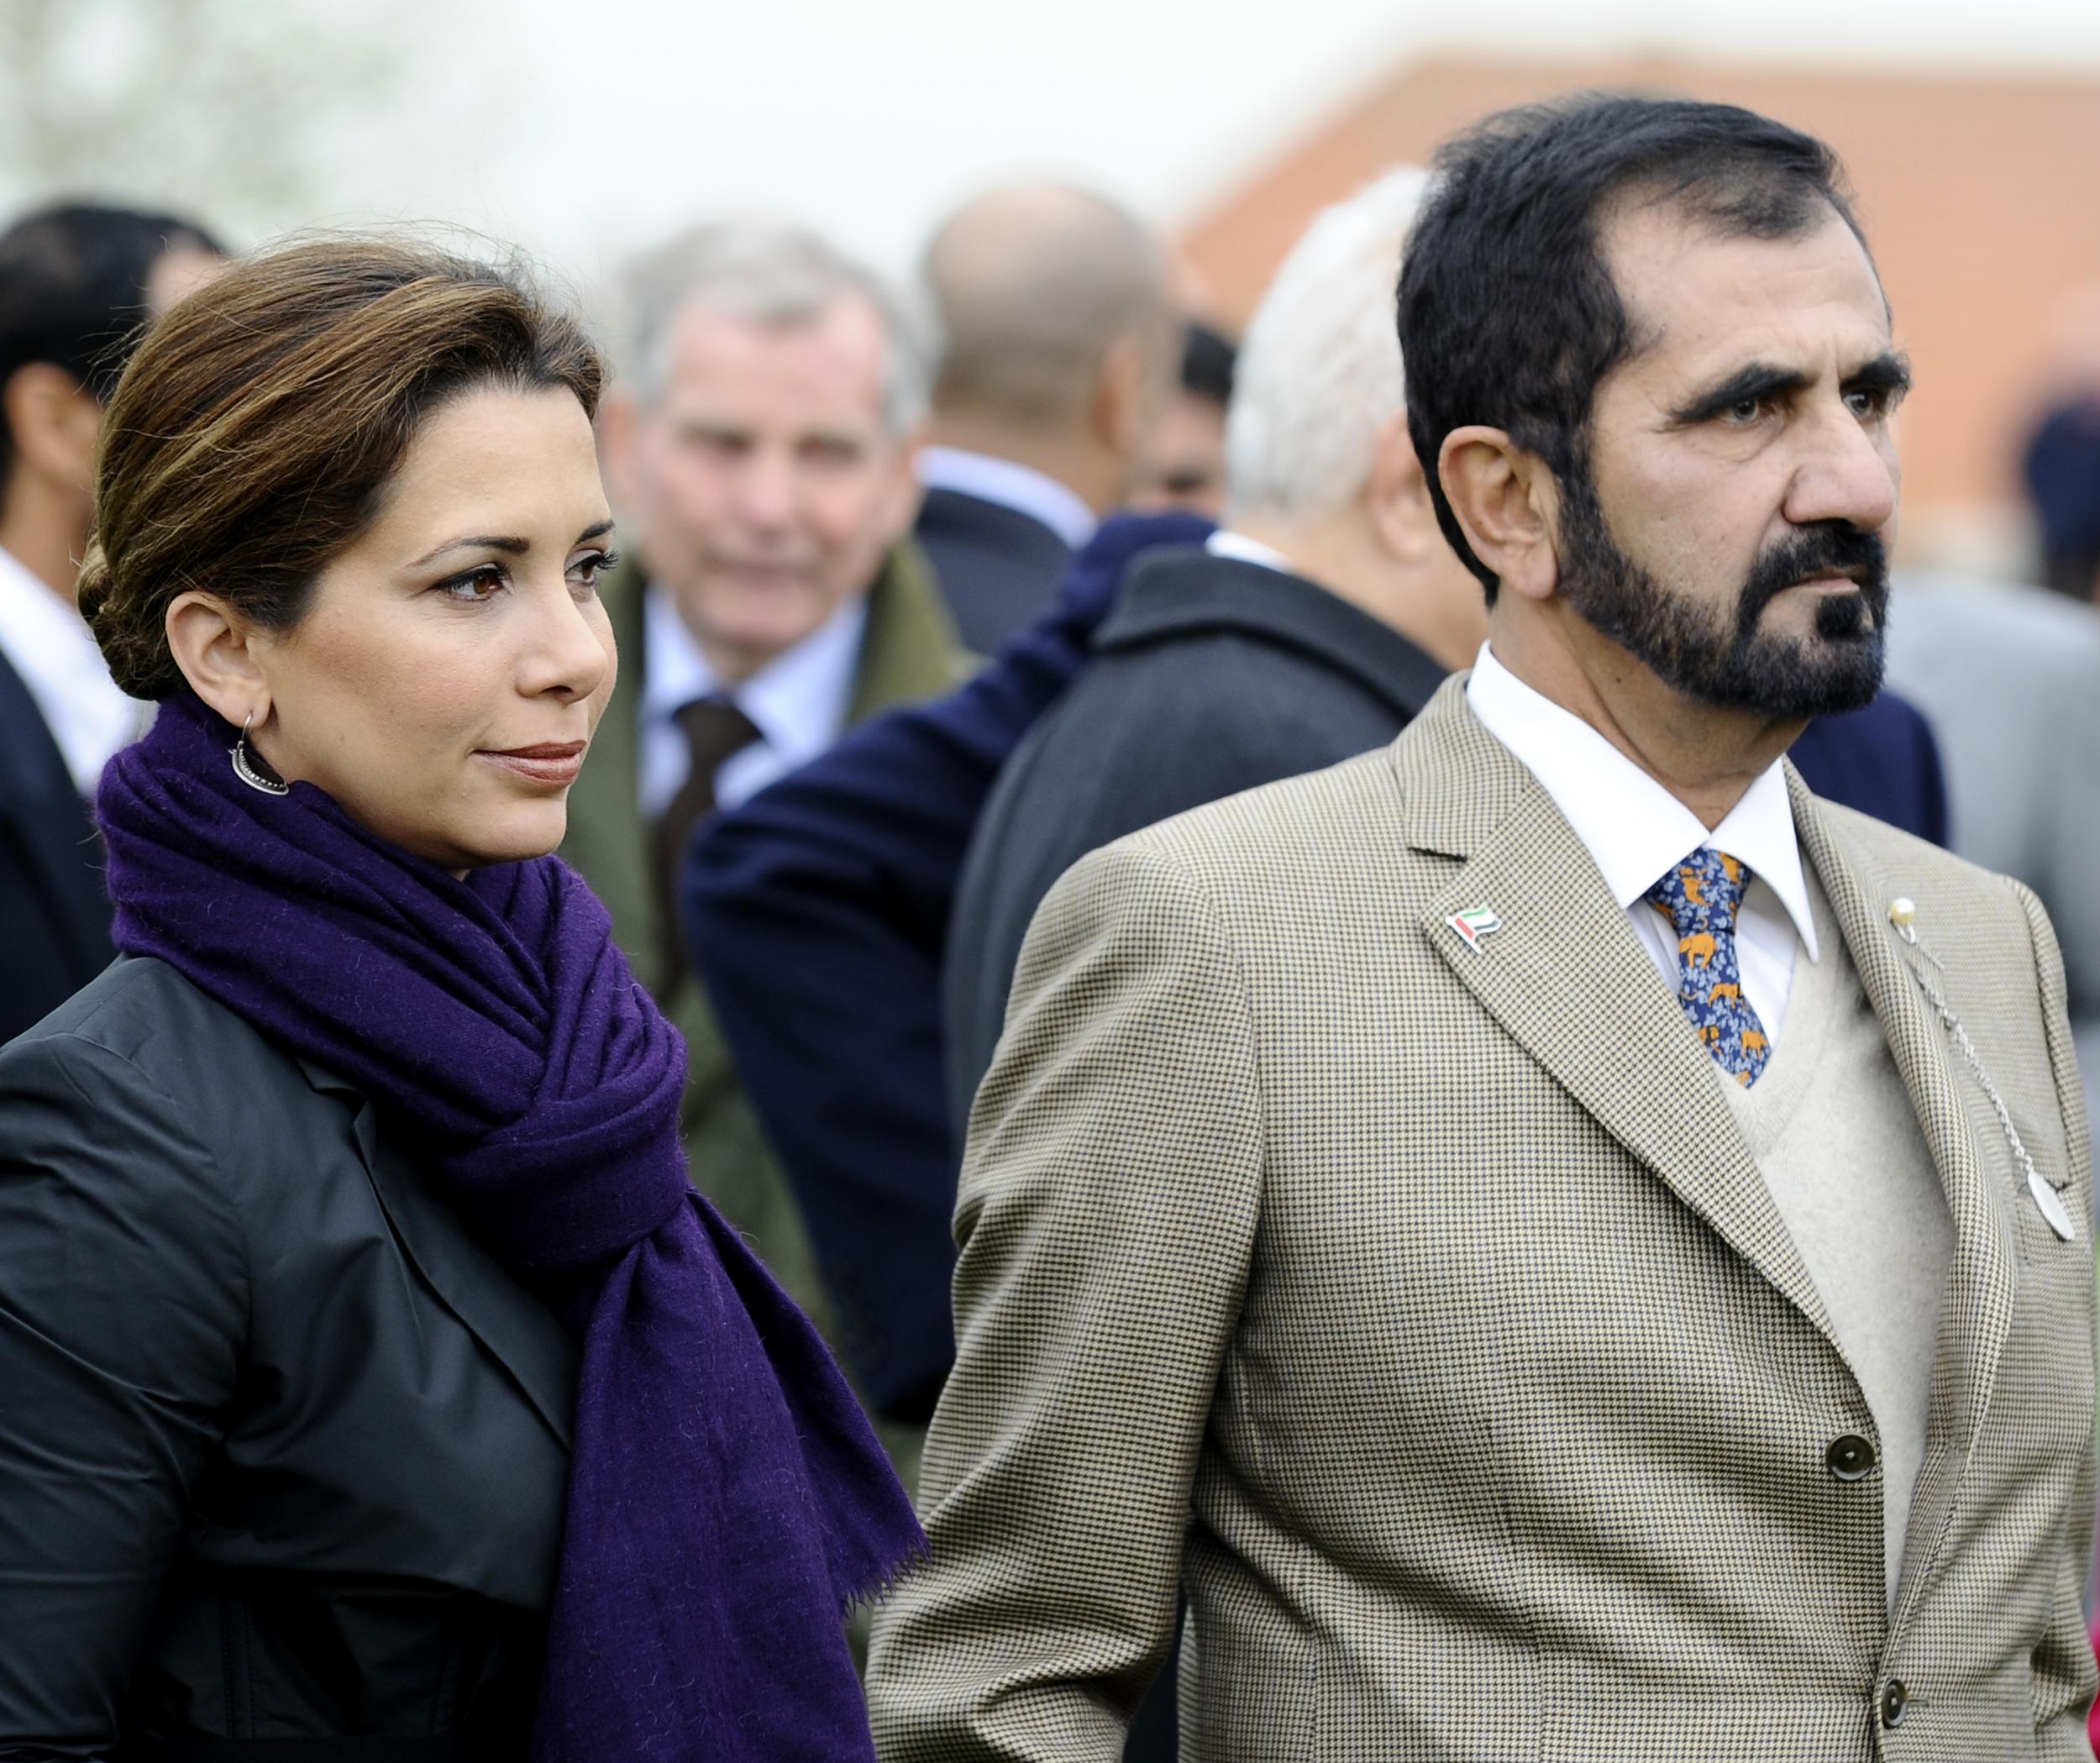 Princess Haya, here with her husband Sheikh Mohammed, is said to have asked for political asylum in the UK